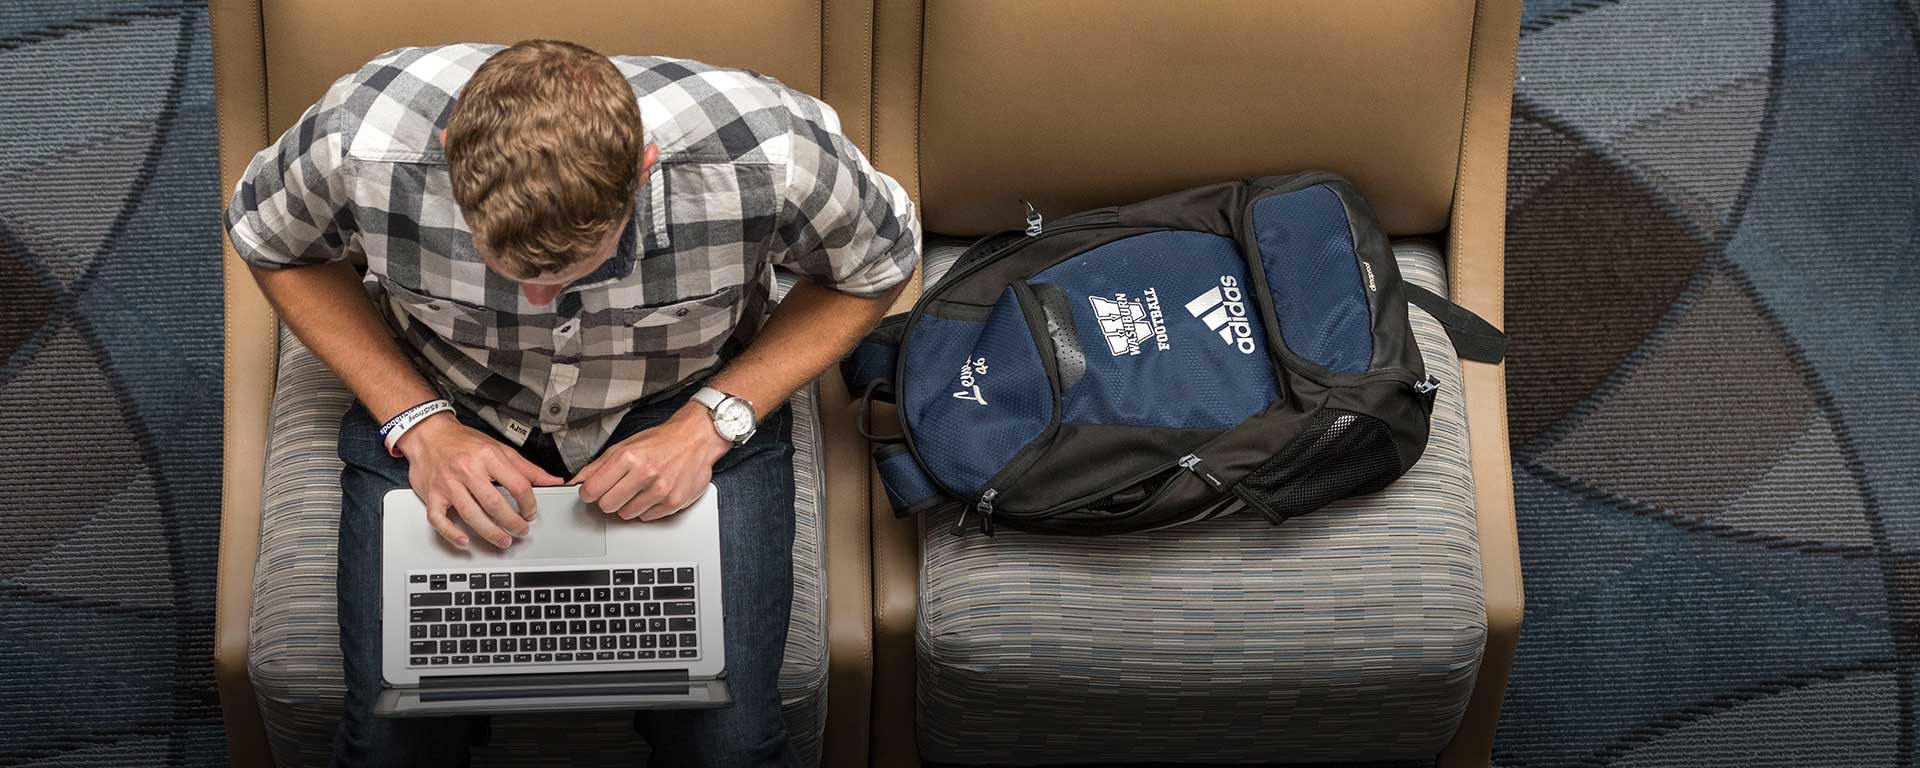 male student on a laptop